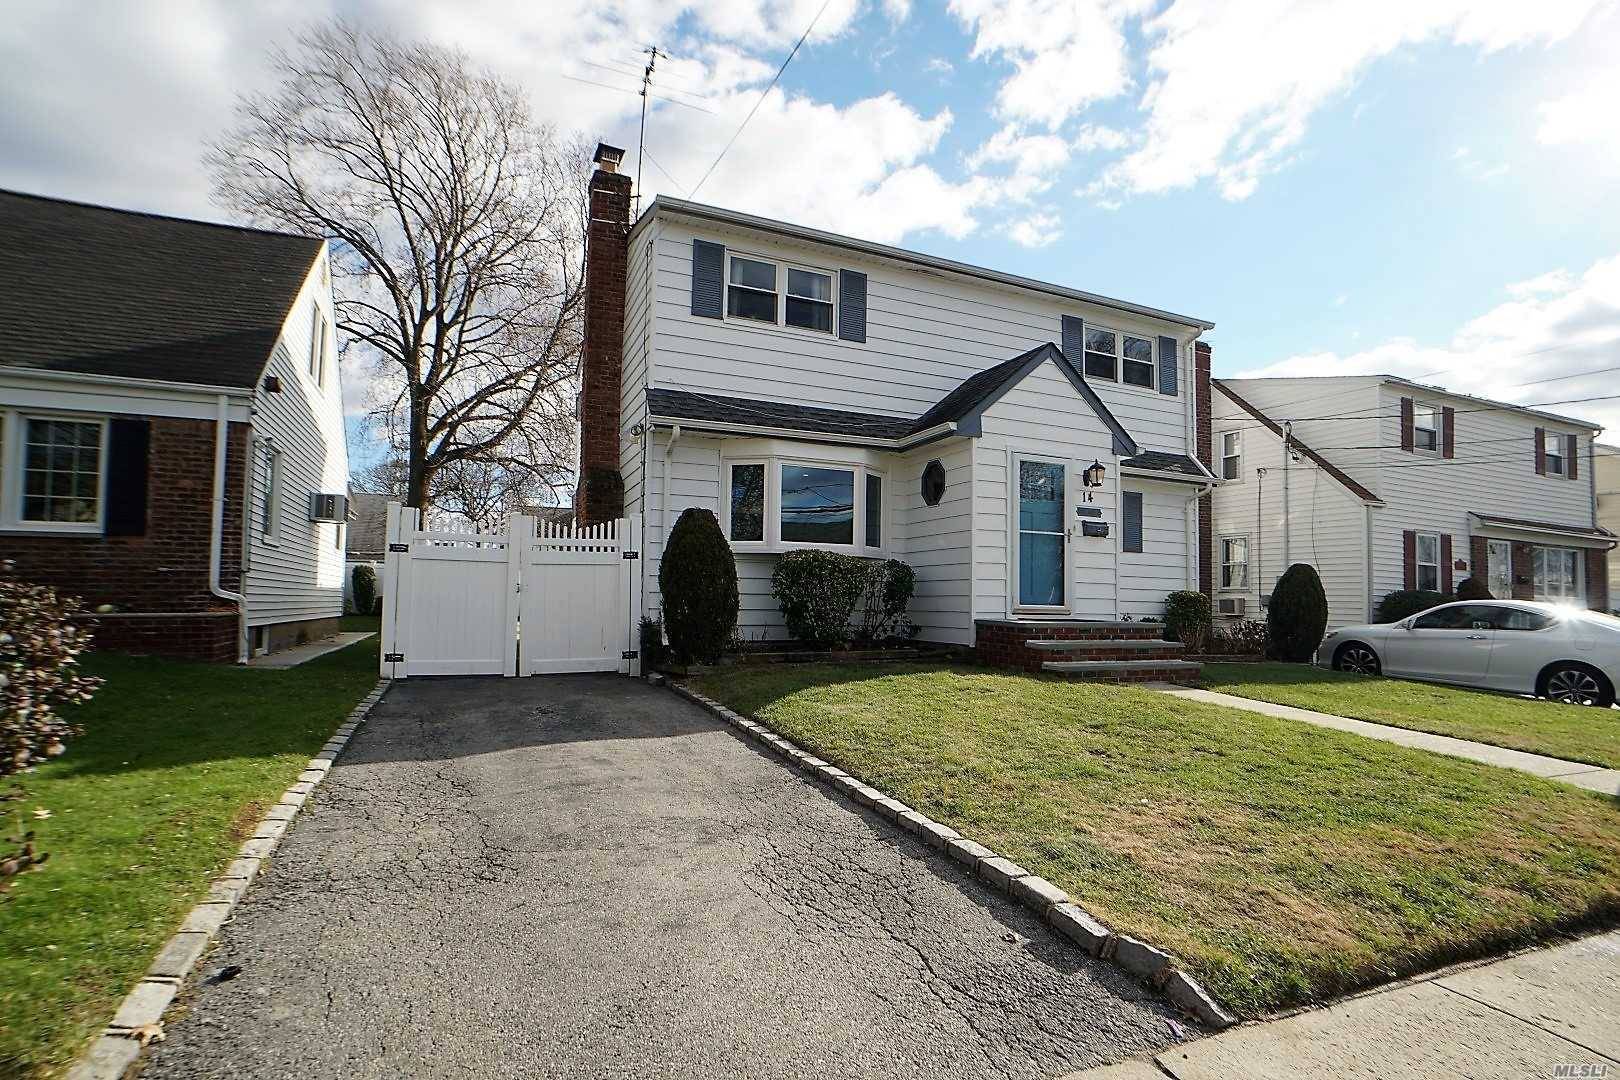 Generously Sized 2 Story Beautiful Colonial Featuring A Full Finished Basement, 3 Bedrooms And 1.